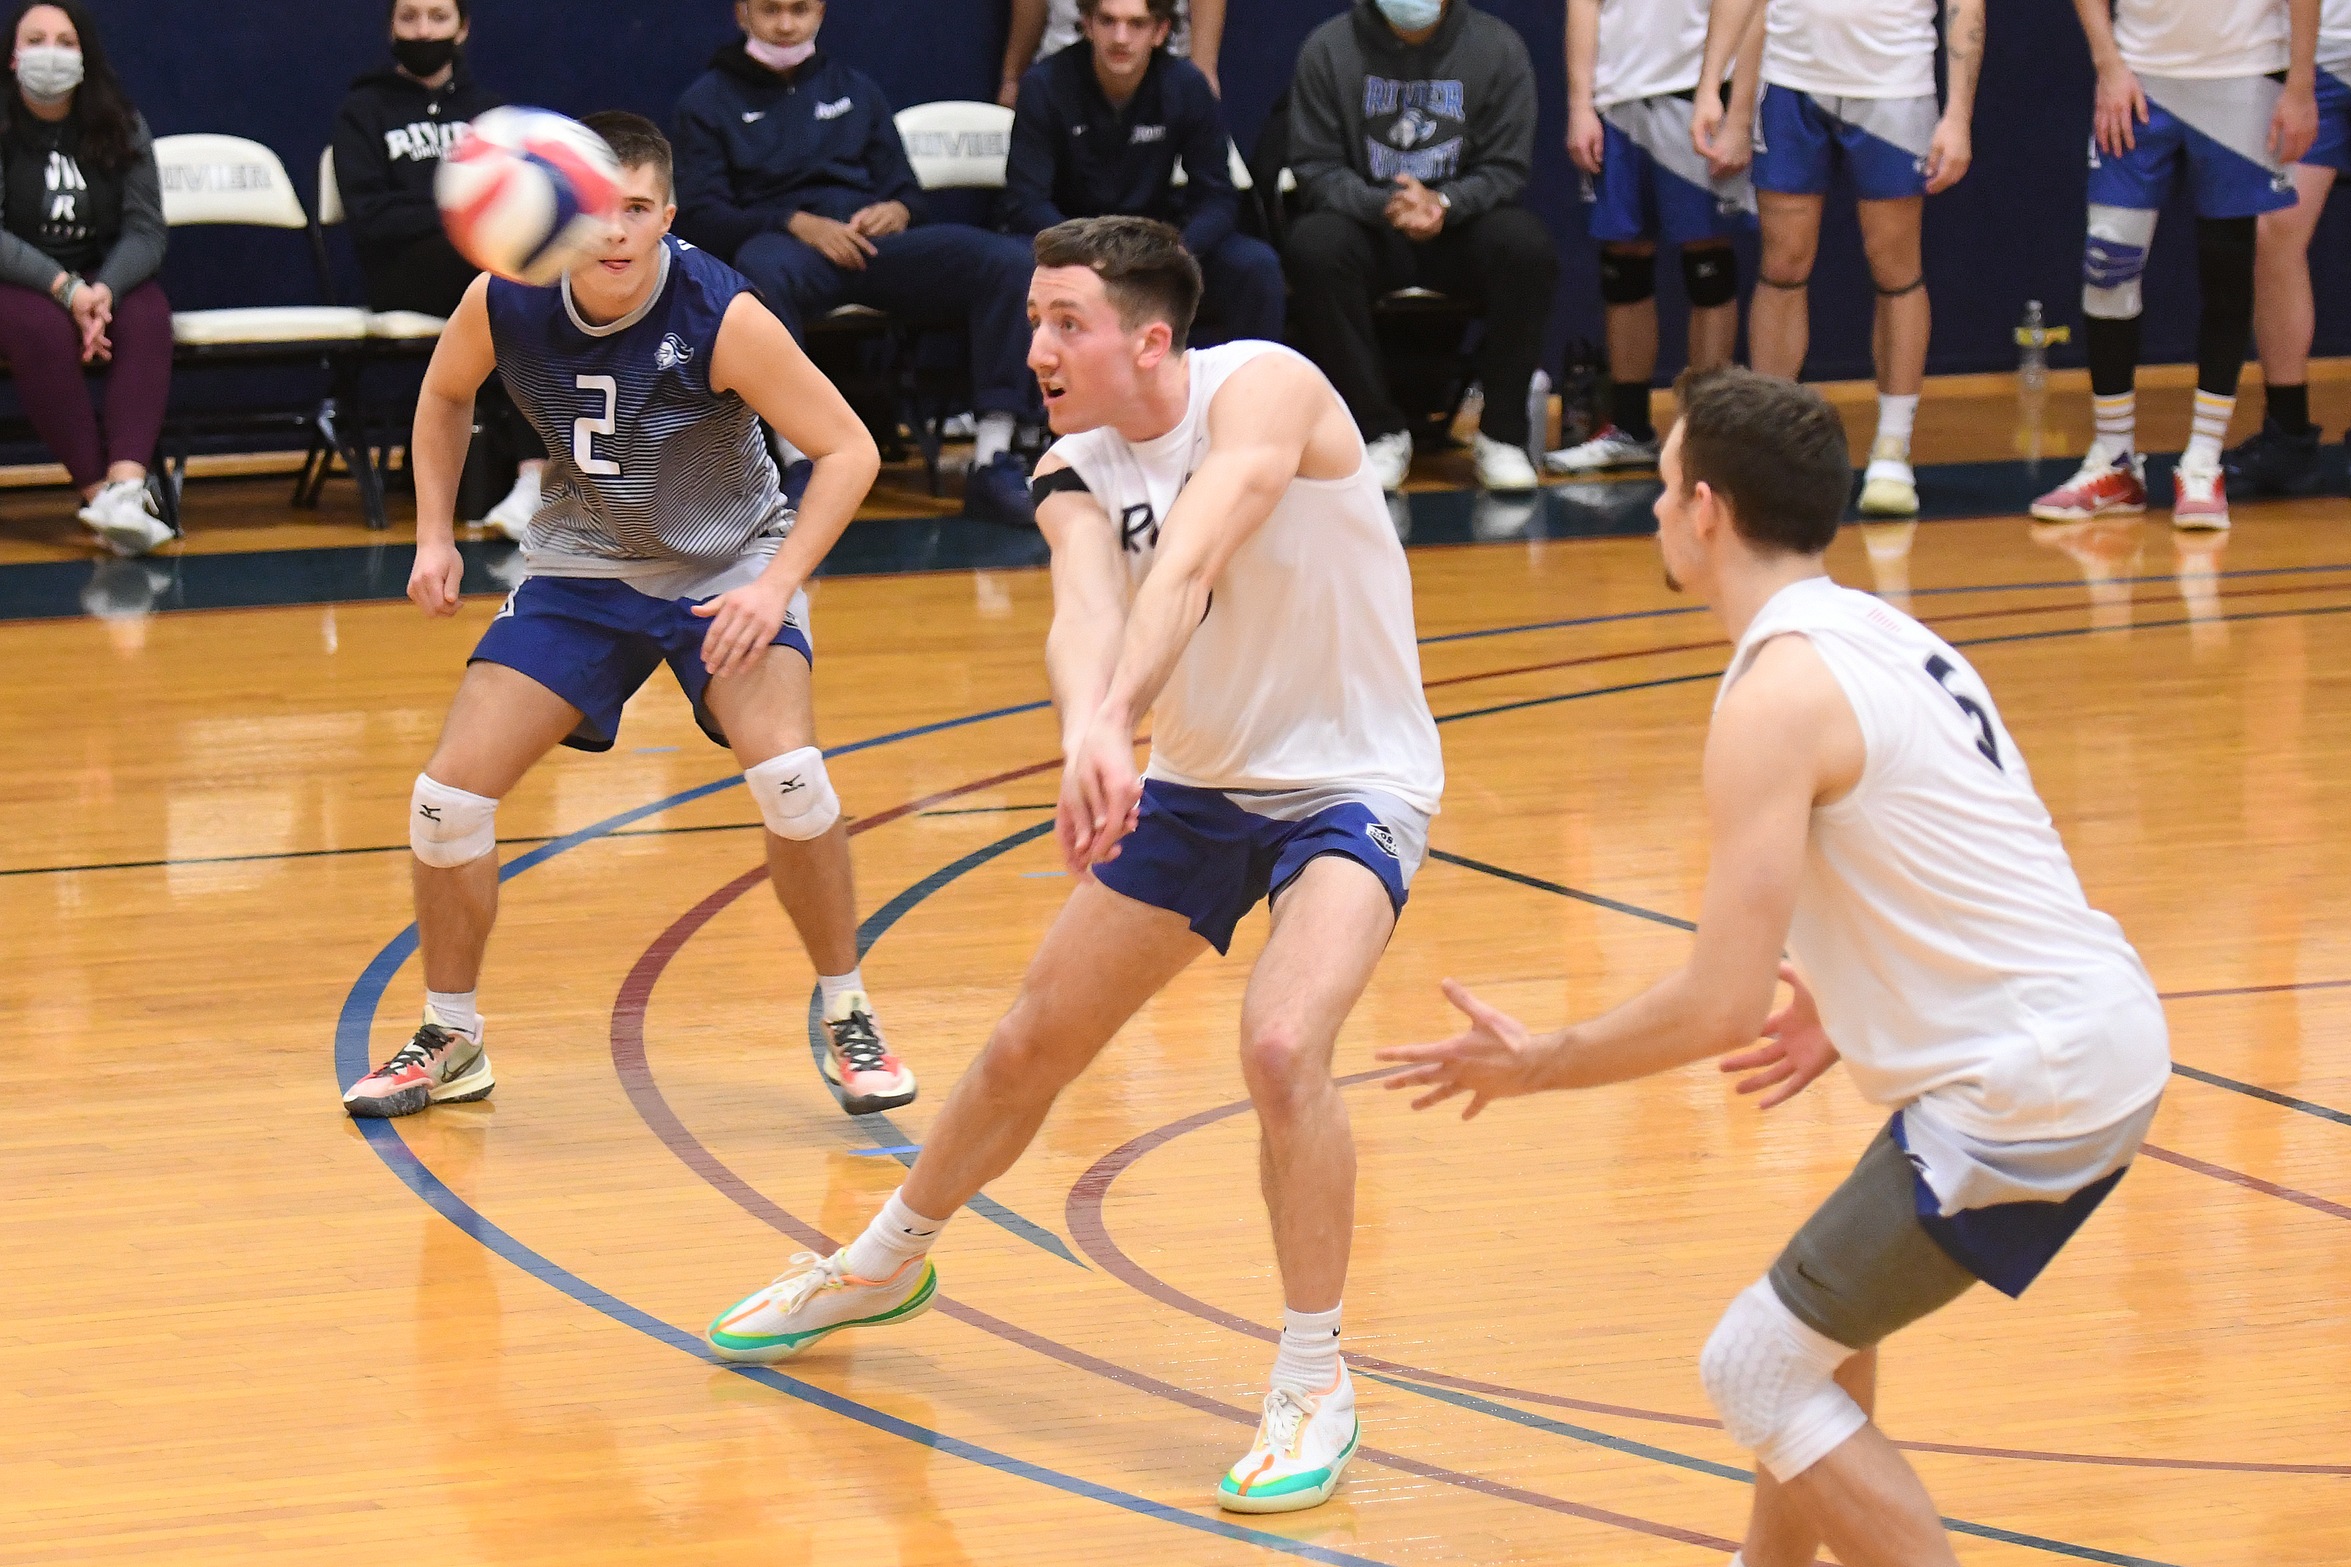 Smith Leads Men’s Volleyball Over Elms